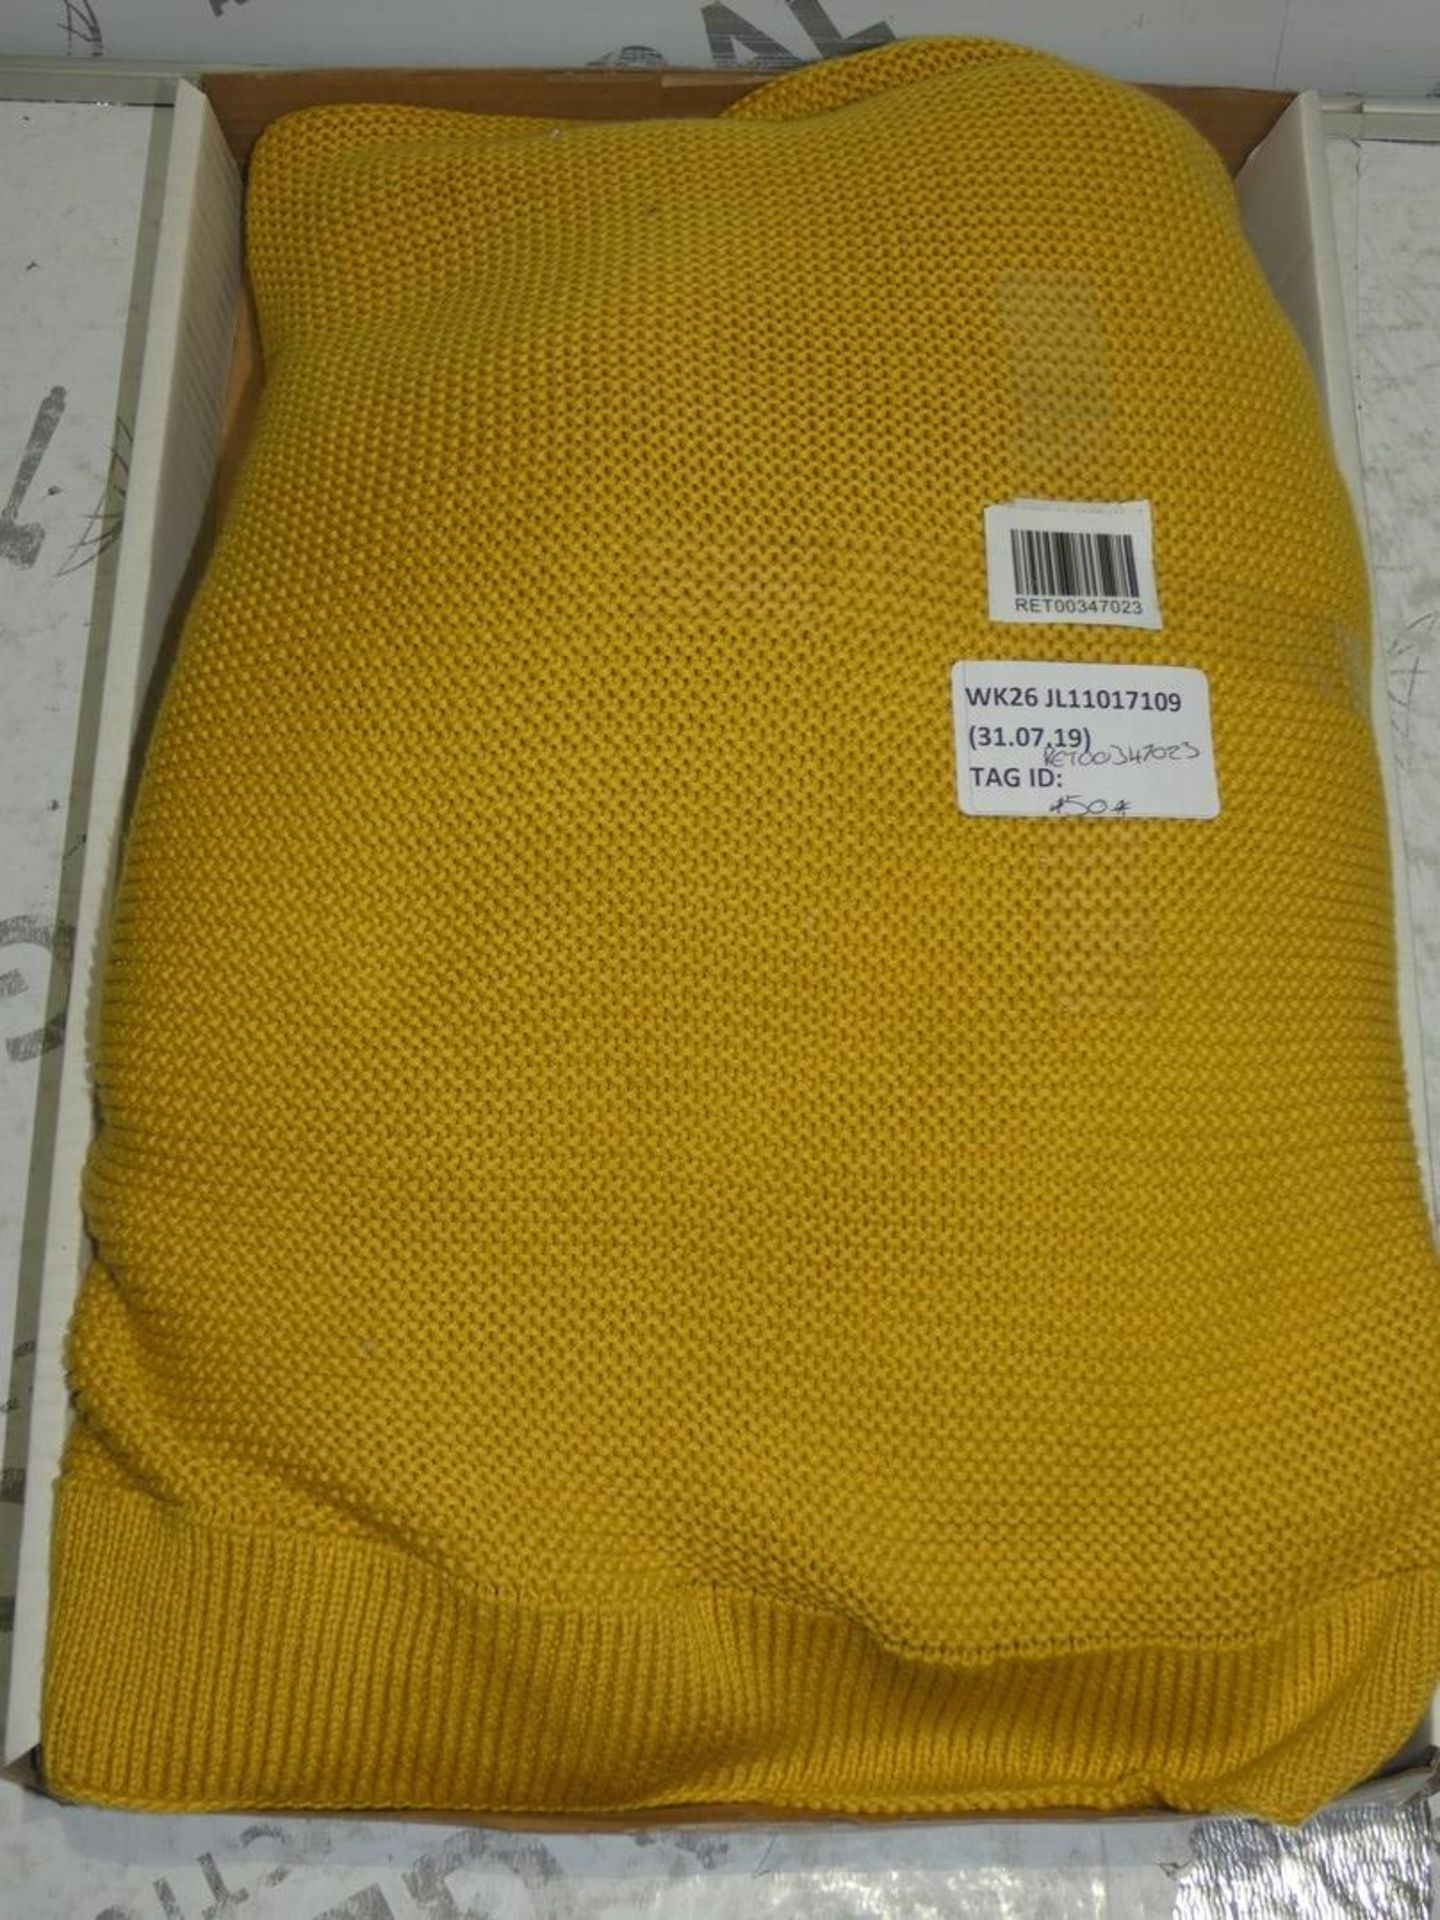 John Lewis And Partners Yellow Designer Sofa Throw RRP £50 (RET00347023) (Viewings And Appraisals